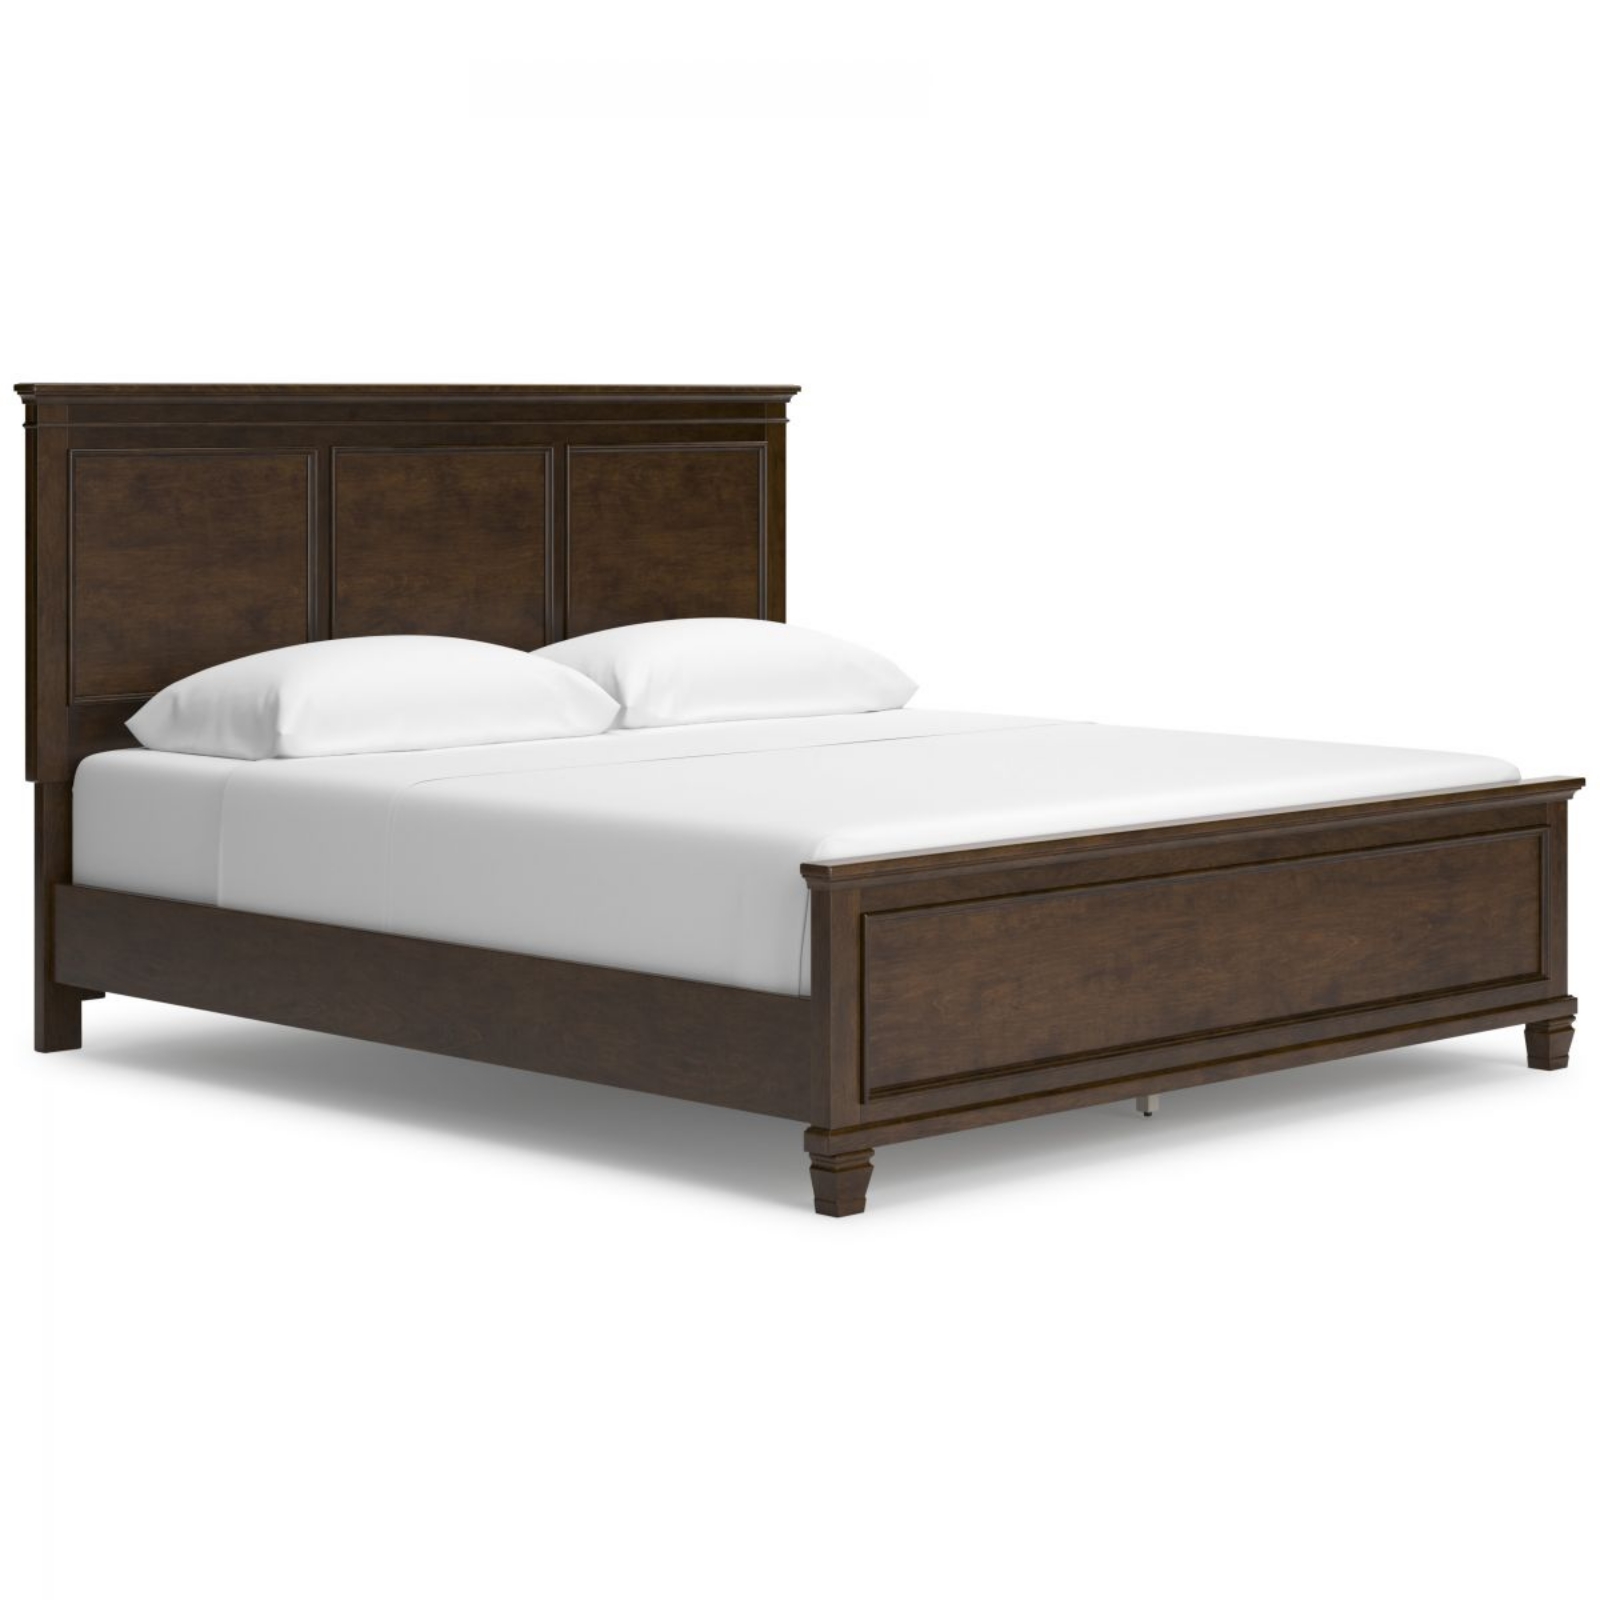 Picture of Danabrin King Size Bed